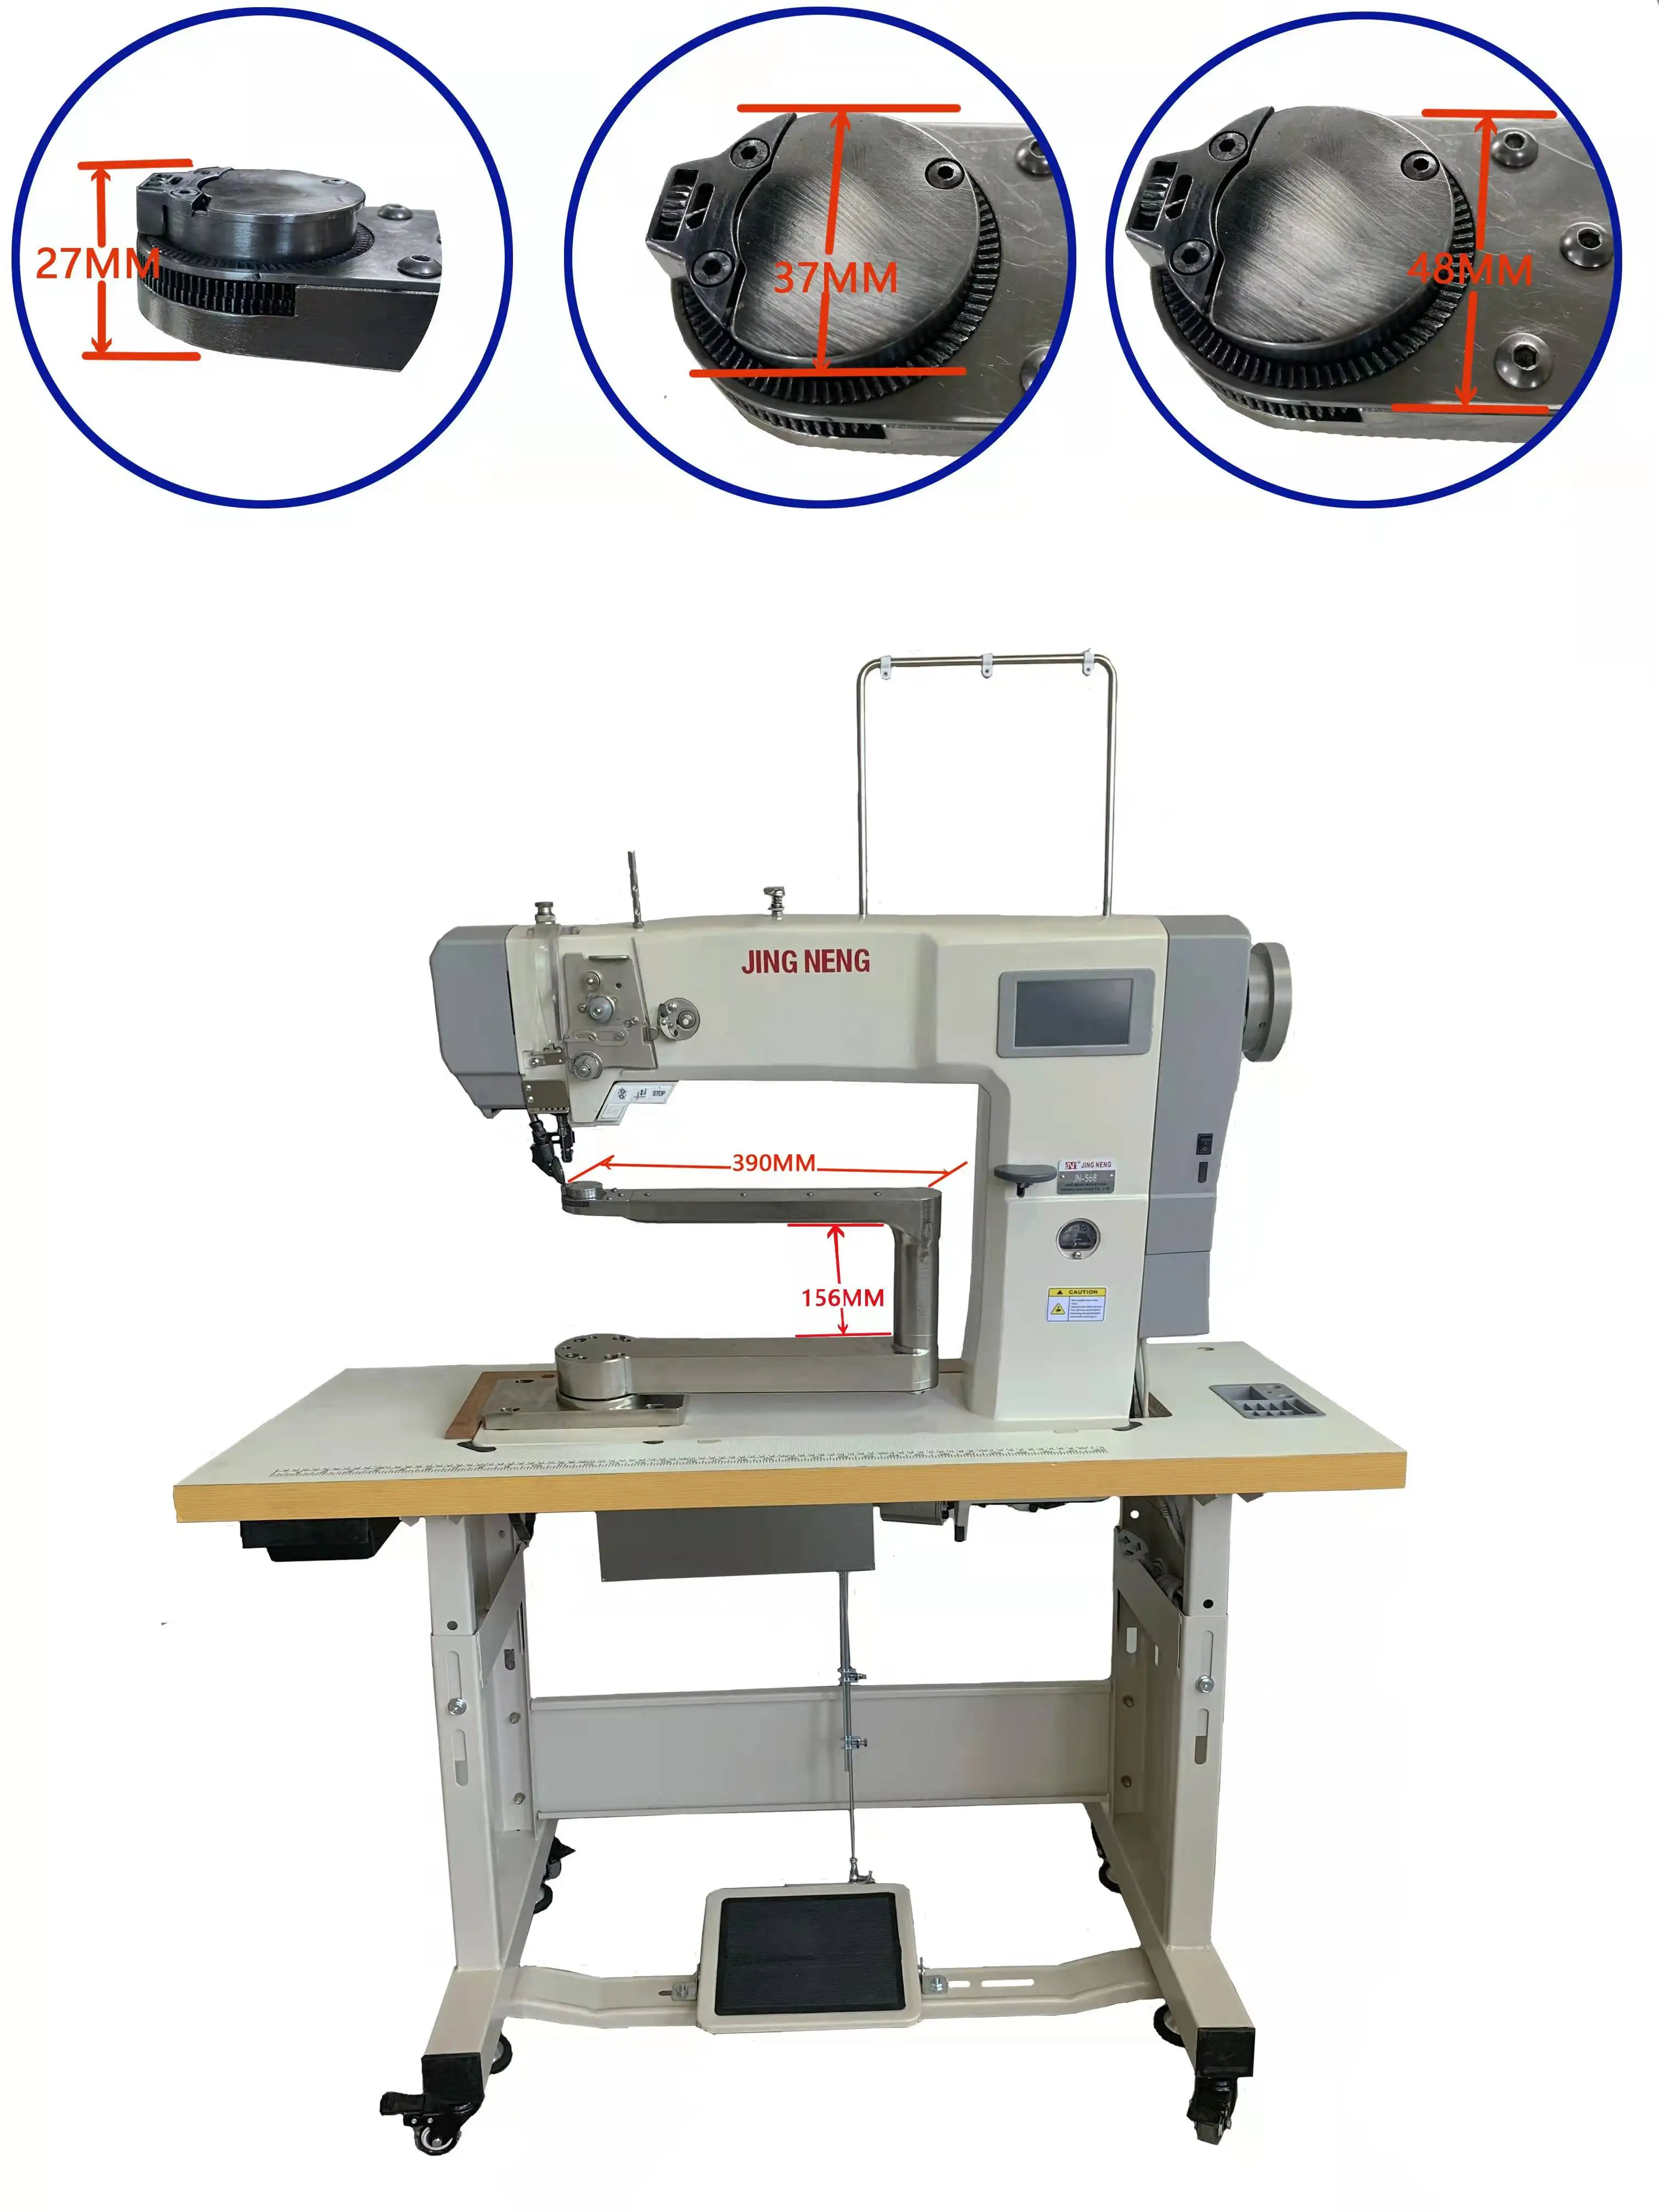 Stepper Motor Heavy Duty Computer Sewing Machine 360 Degree Rotating Roller Feed Sewing Machine